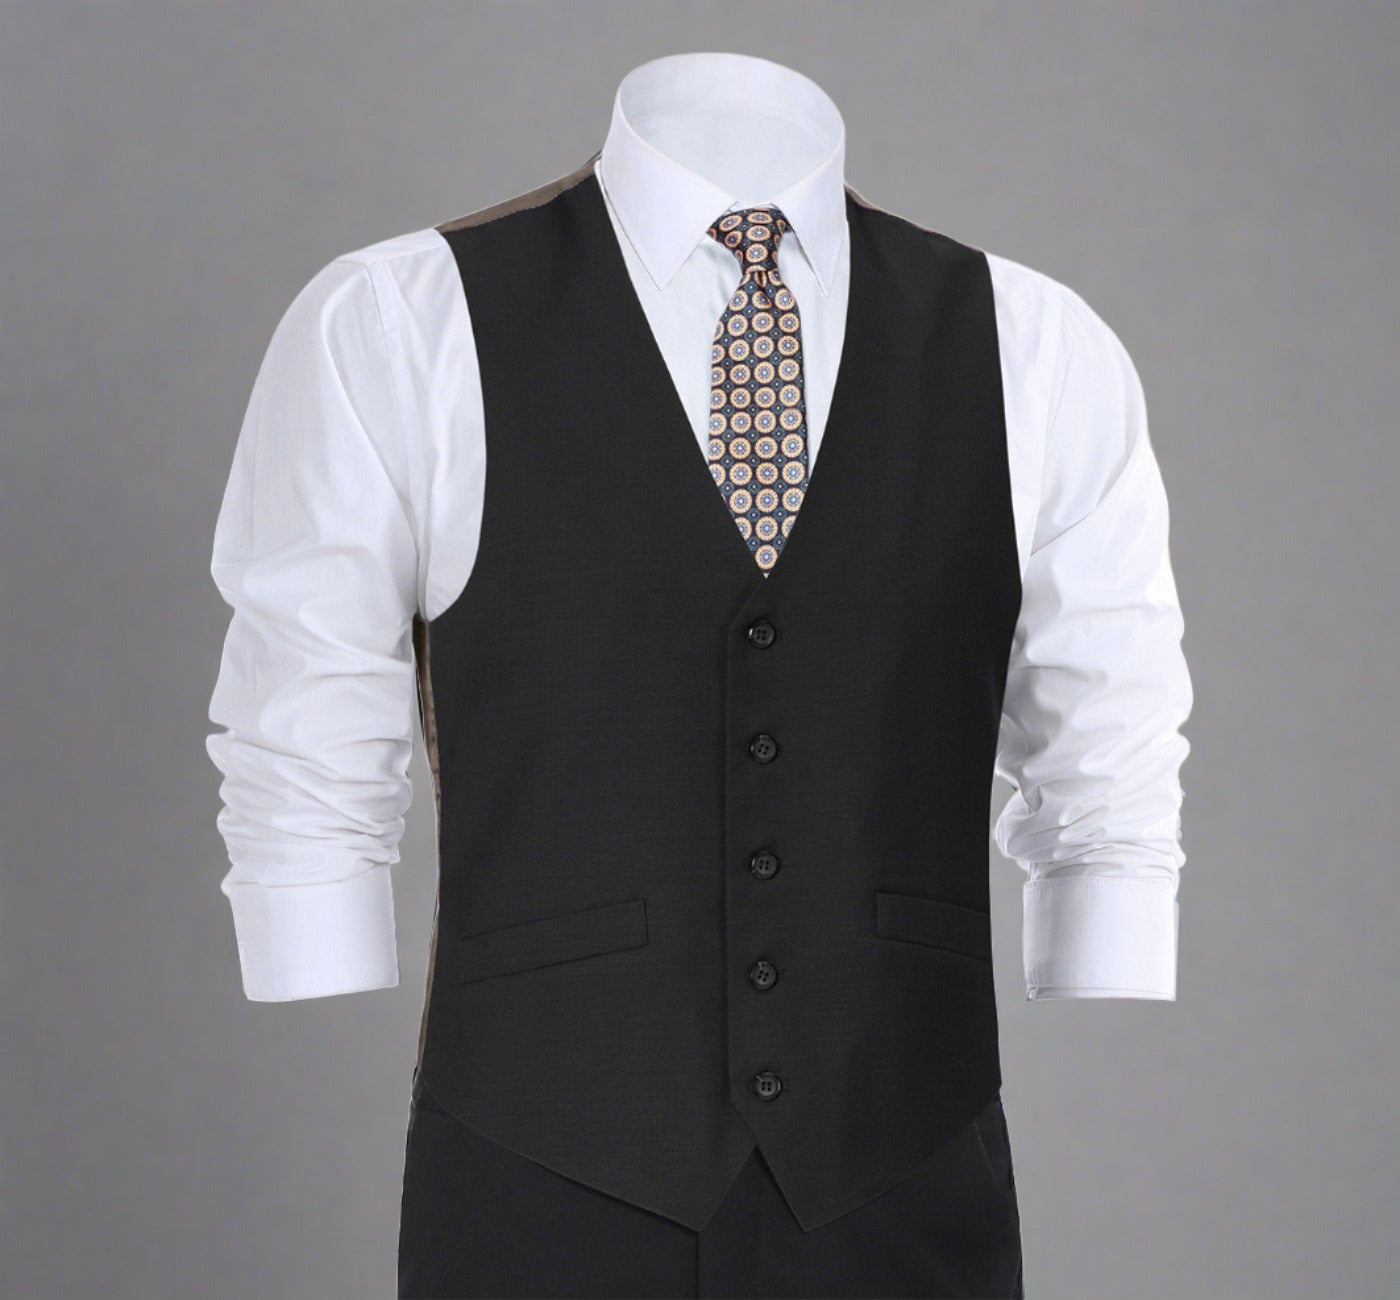 Super 140s Wool Waistcoat in Black (Regular and Long Available) by Renoir